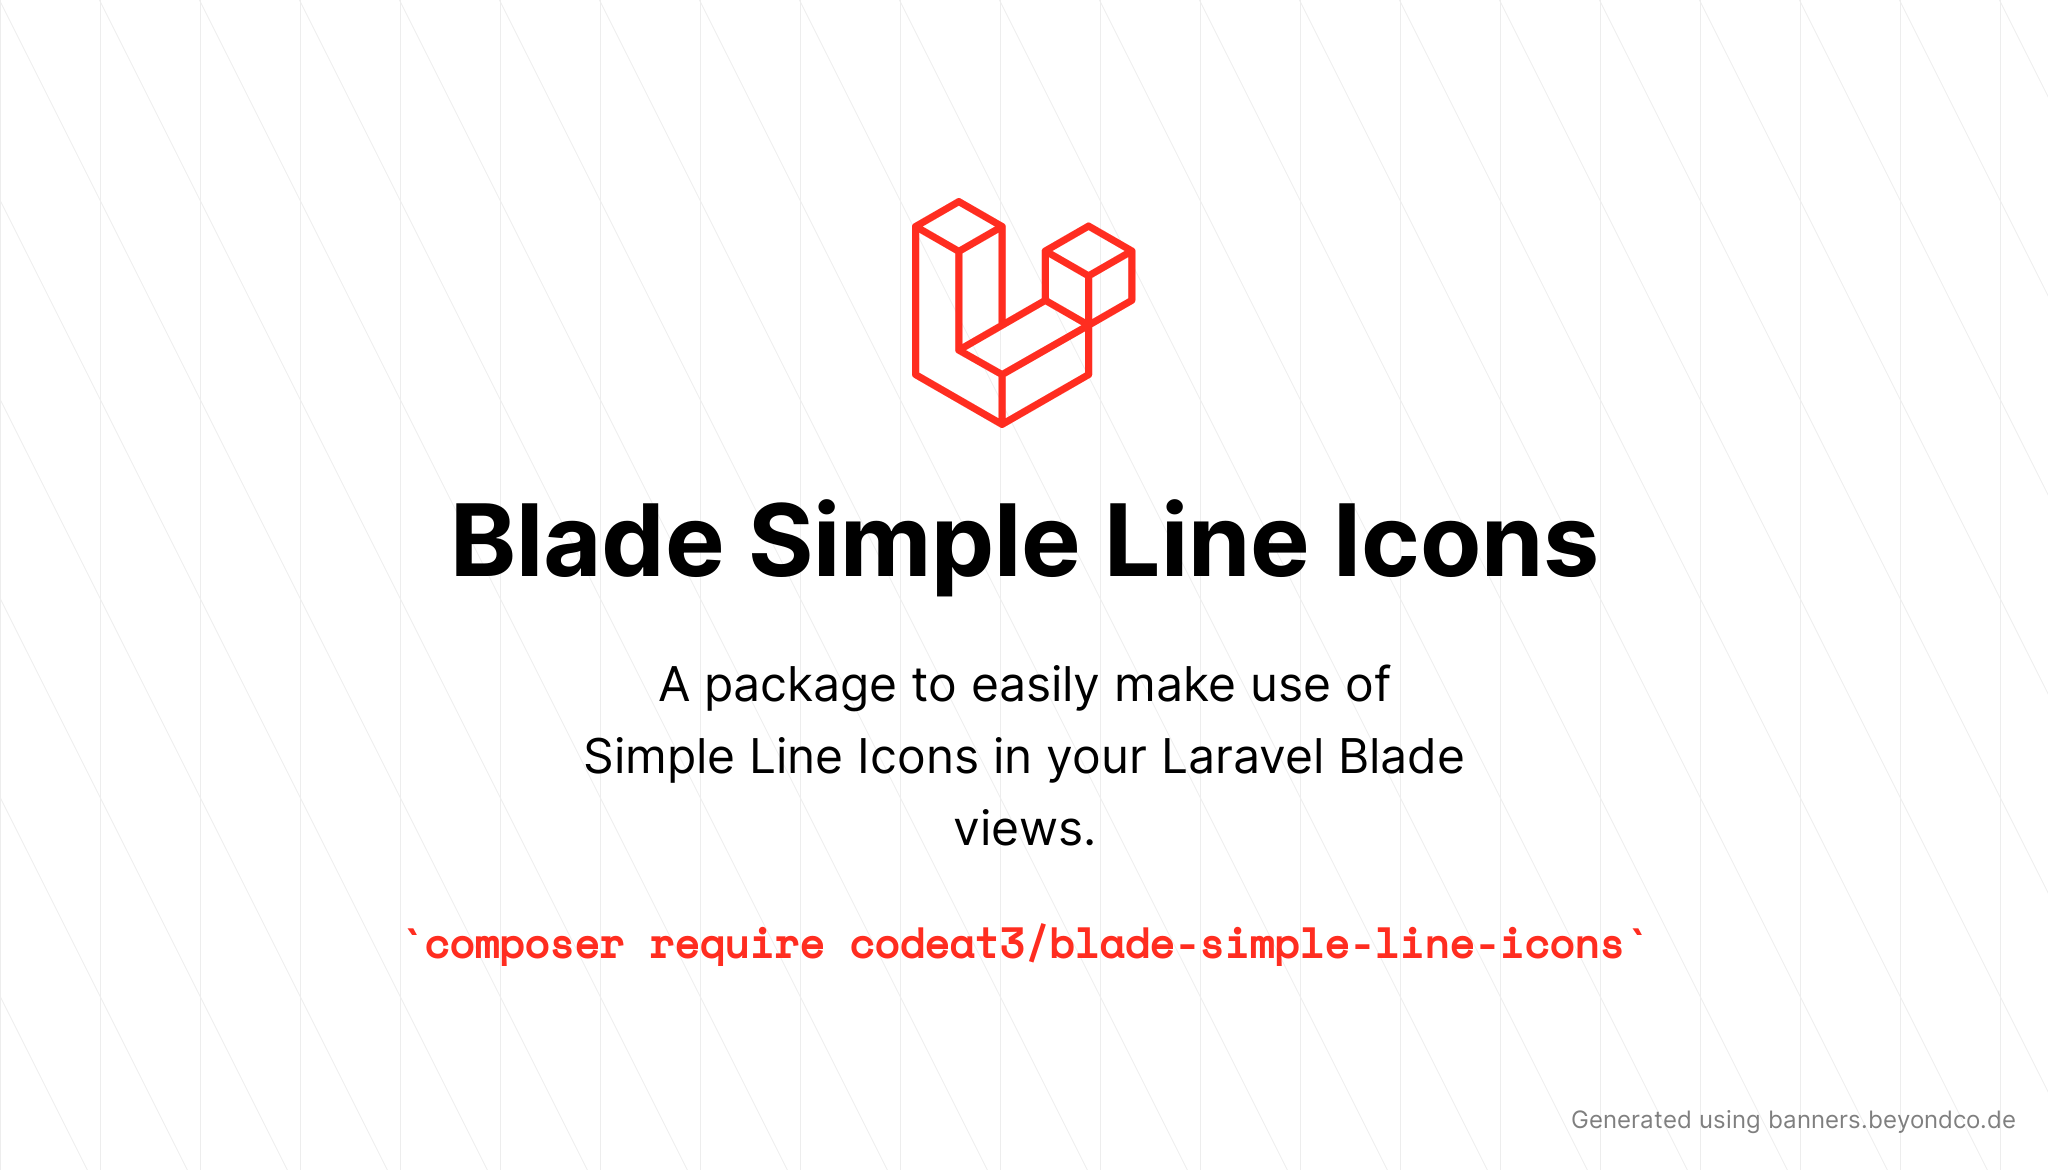 socialcard-blade-simple-line-icons.png